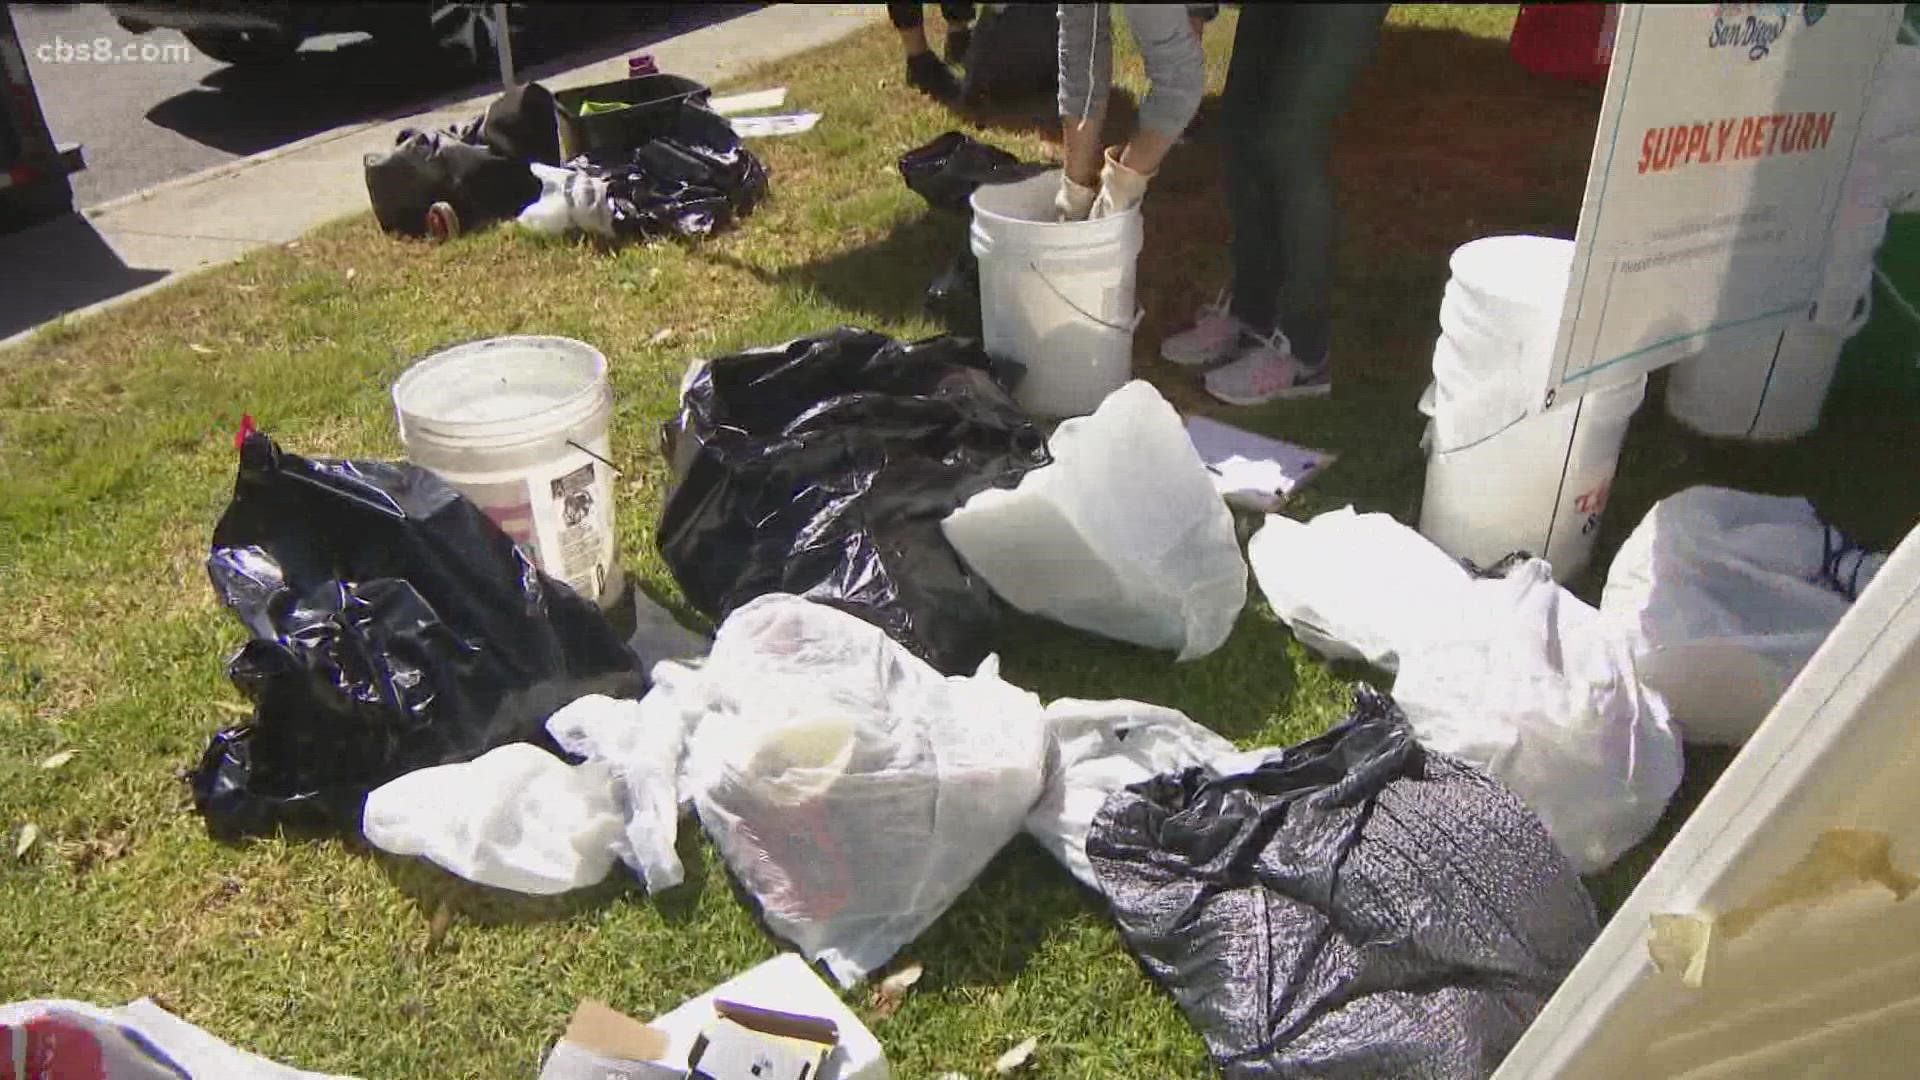 Around 5,000 volunteers cleaned trash and garbage in sites all over the county